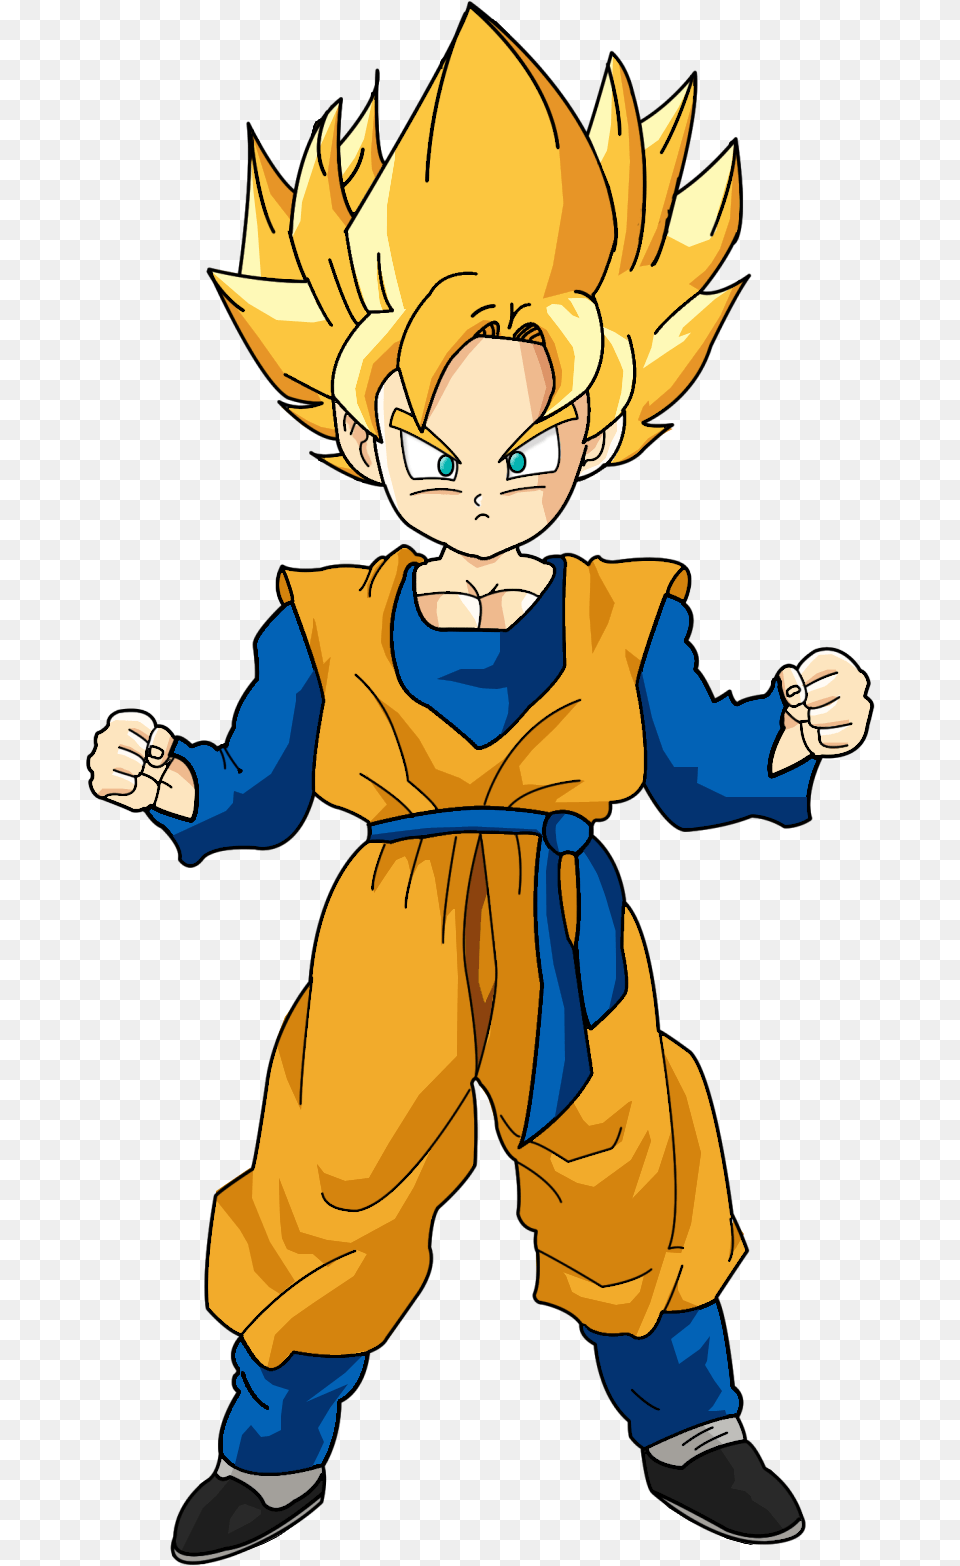 Hi This Is Goten Ssj And I Like How They Resembled Dragon Ball Z Goten Super Saiyan, Book, Comics, Publication, Baby Free Png Download